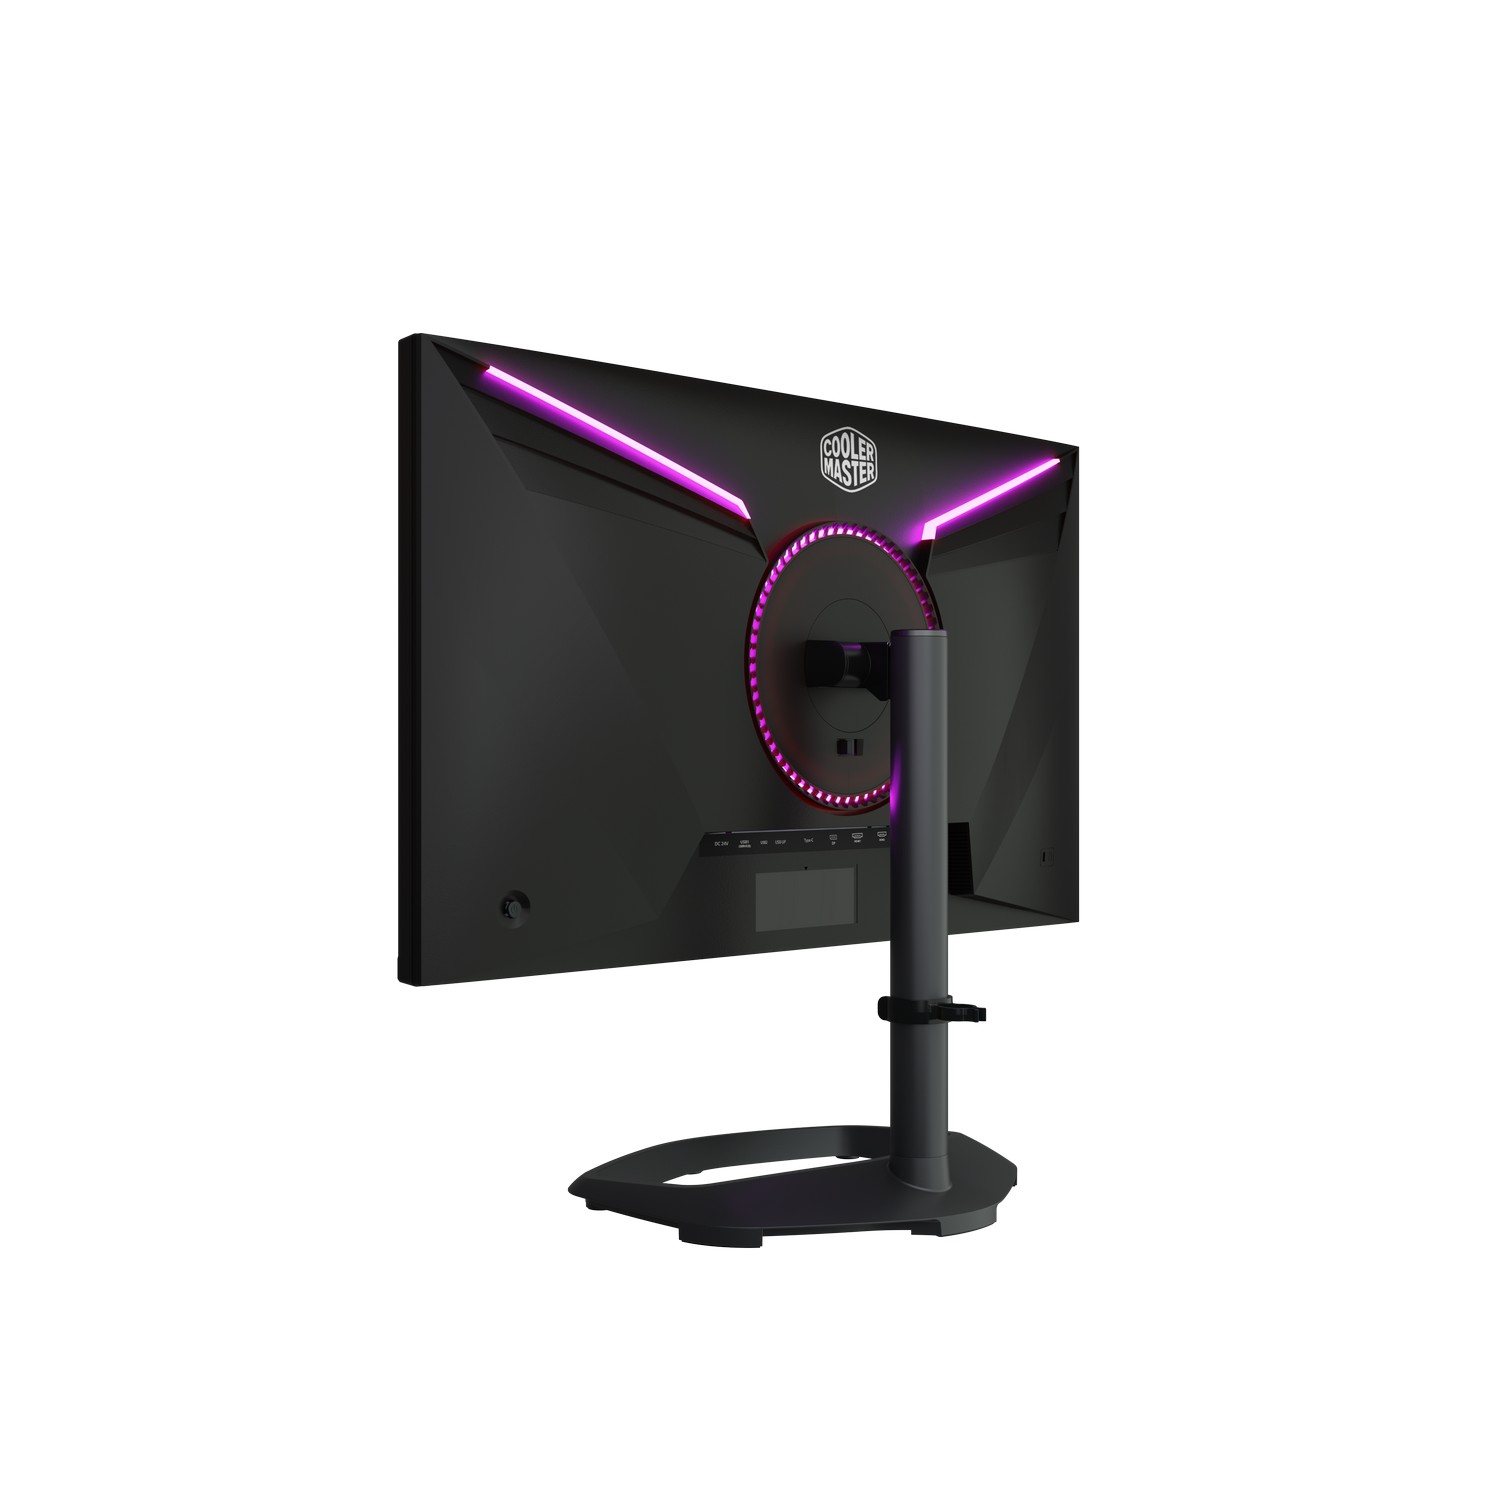 Cooler Master Tempest GP27U 27" 3840x2160 IPS 160Hz FreeSync HDR HDMI 2.1 Widescreen Gaming Monitor